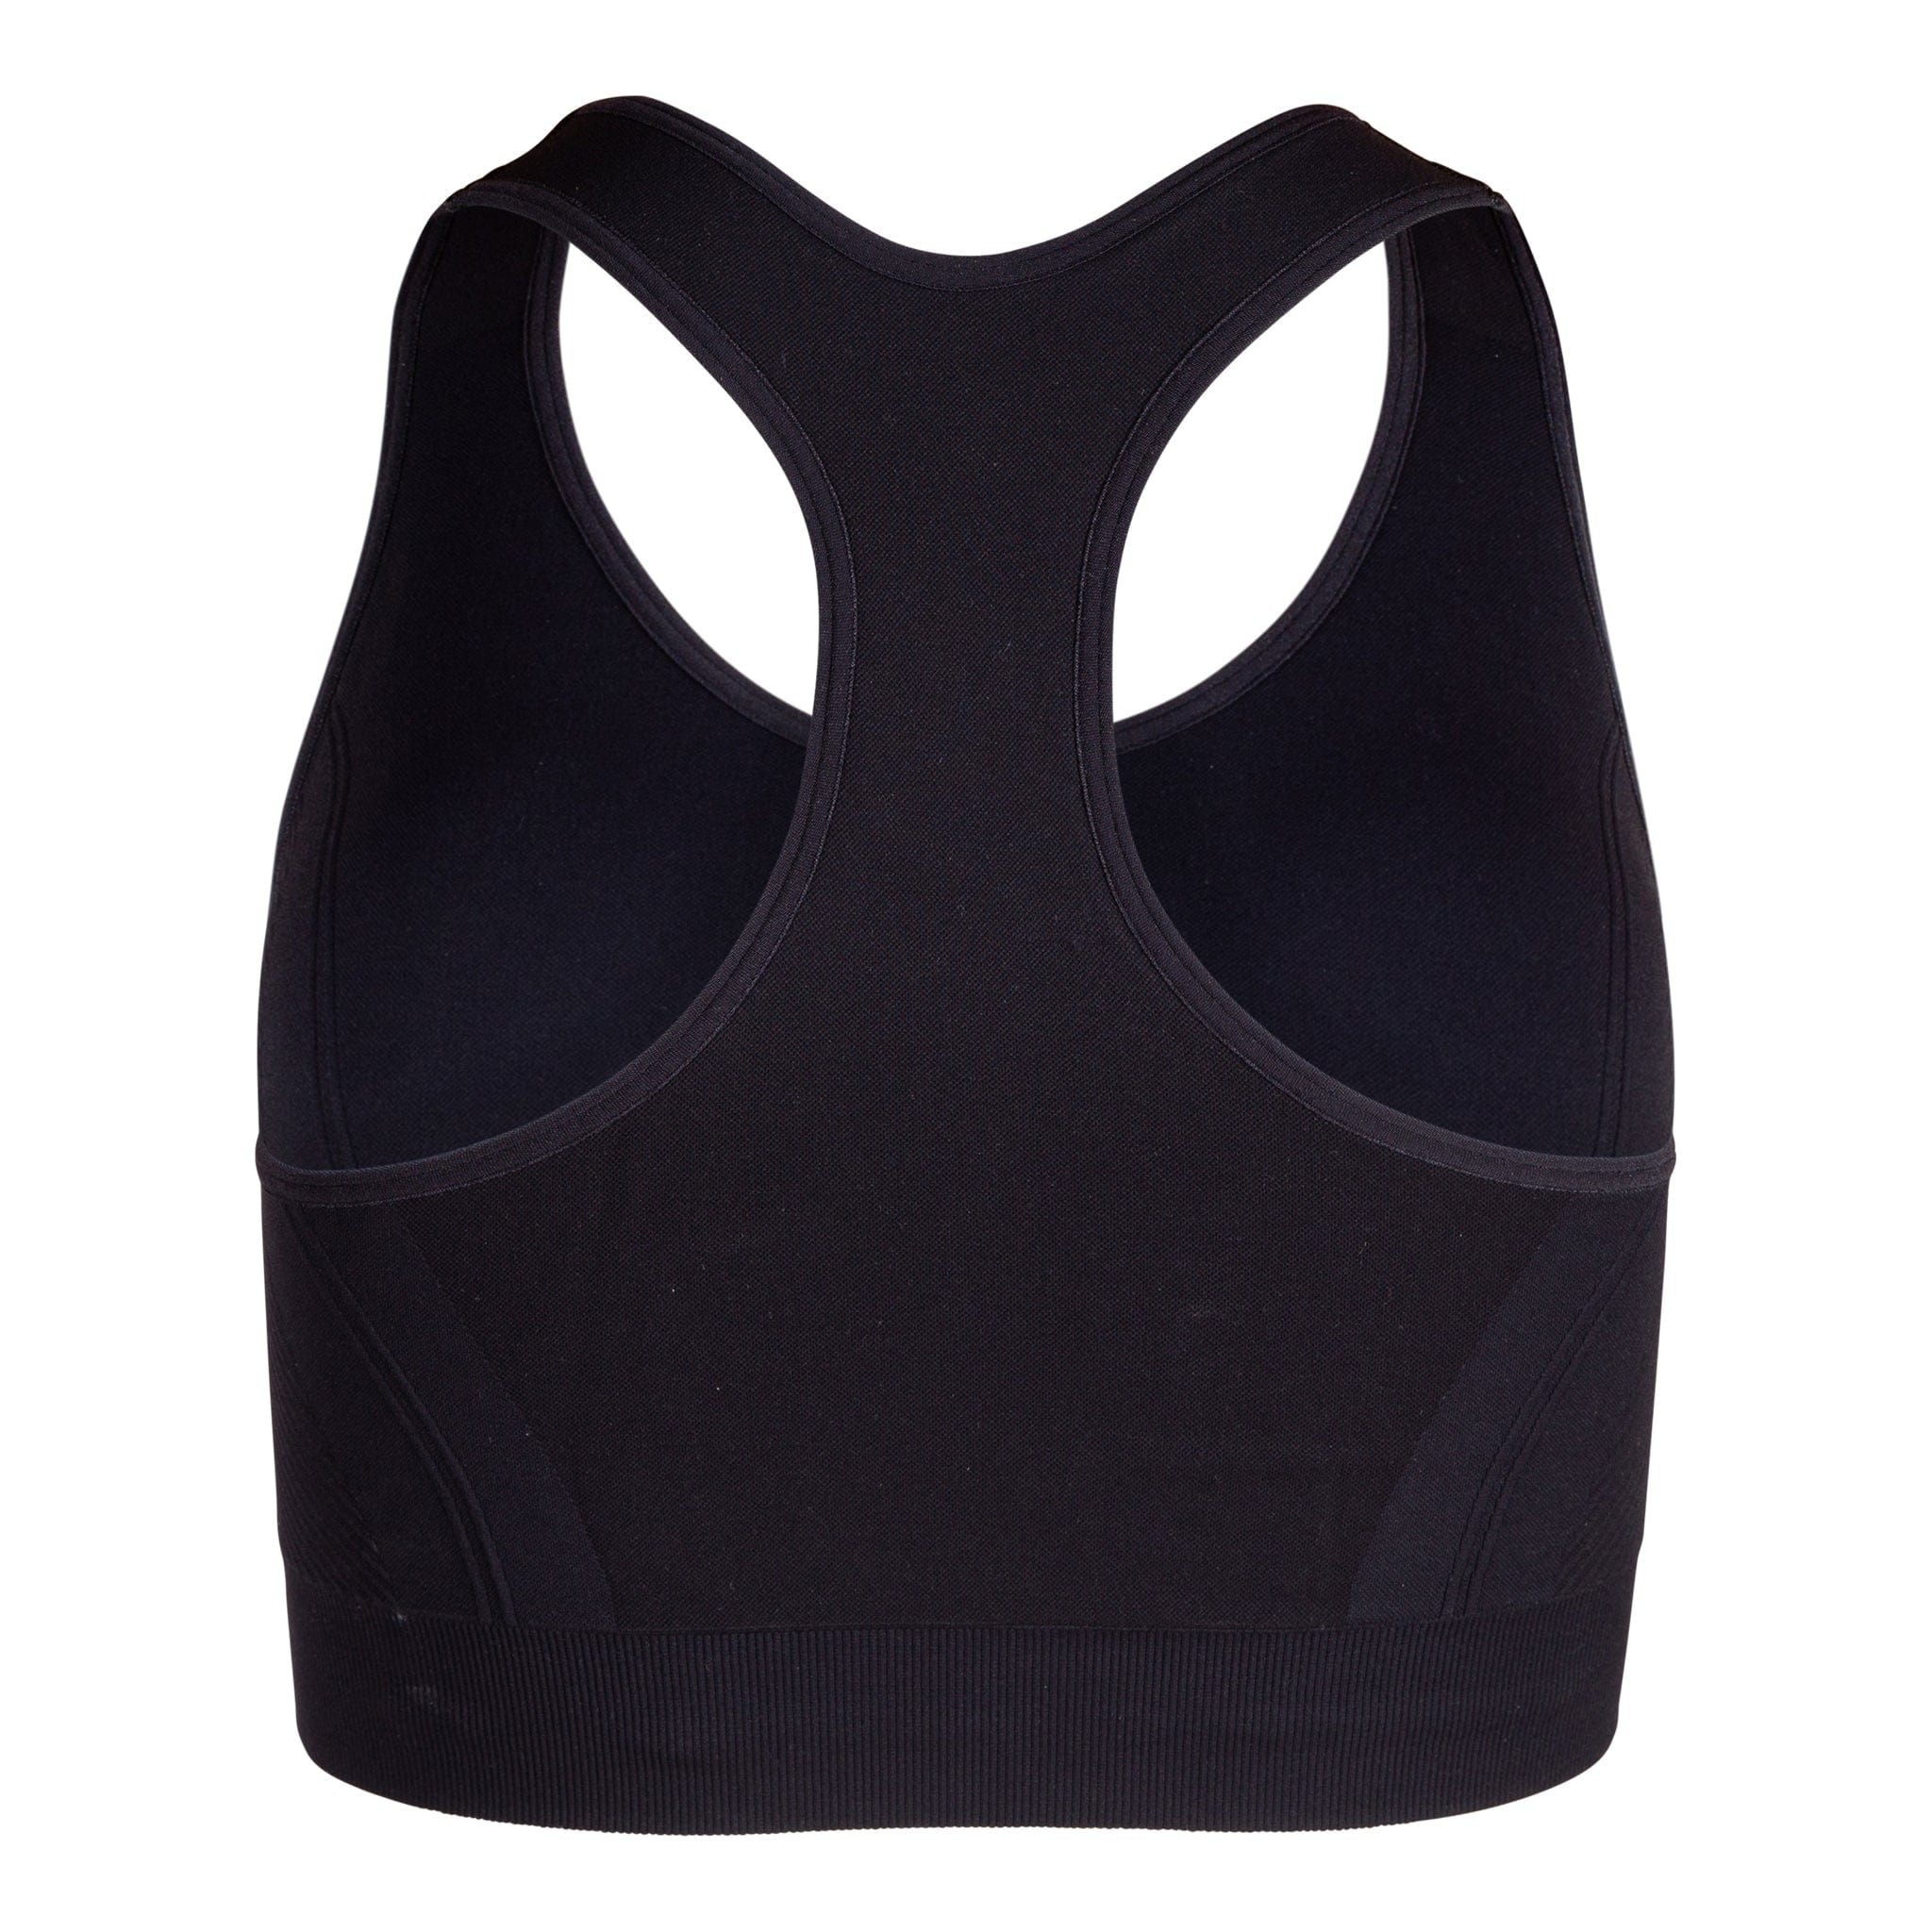 Busty Petites: The Best Fitting And Supportive Sports Bras - Beth